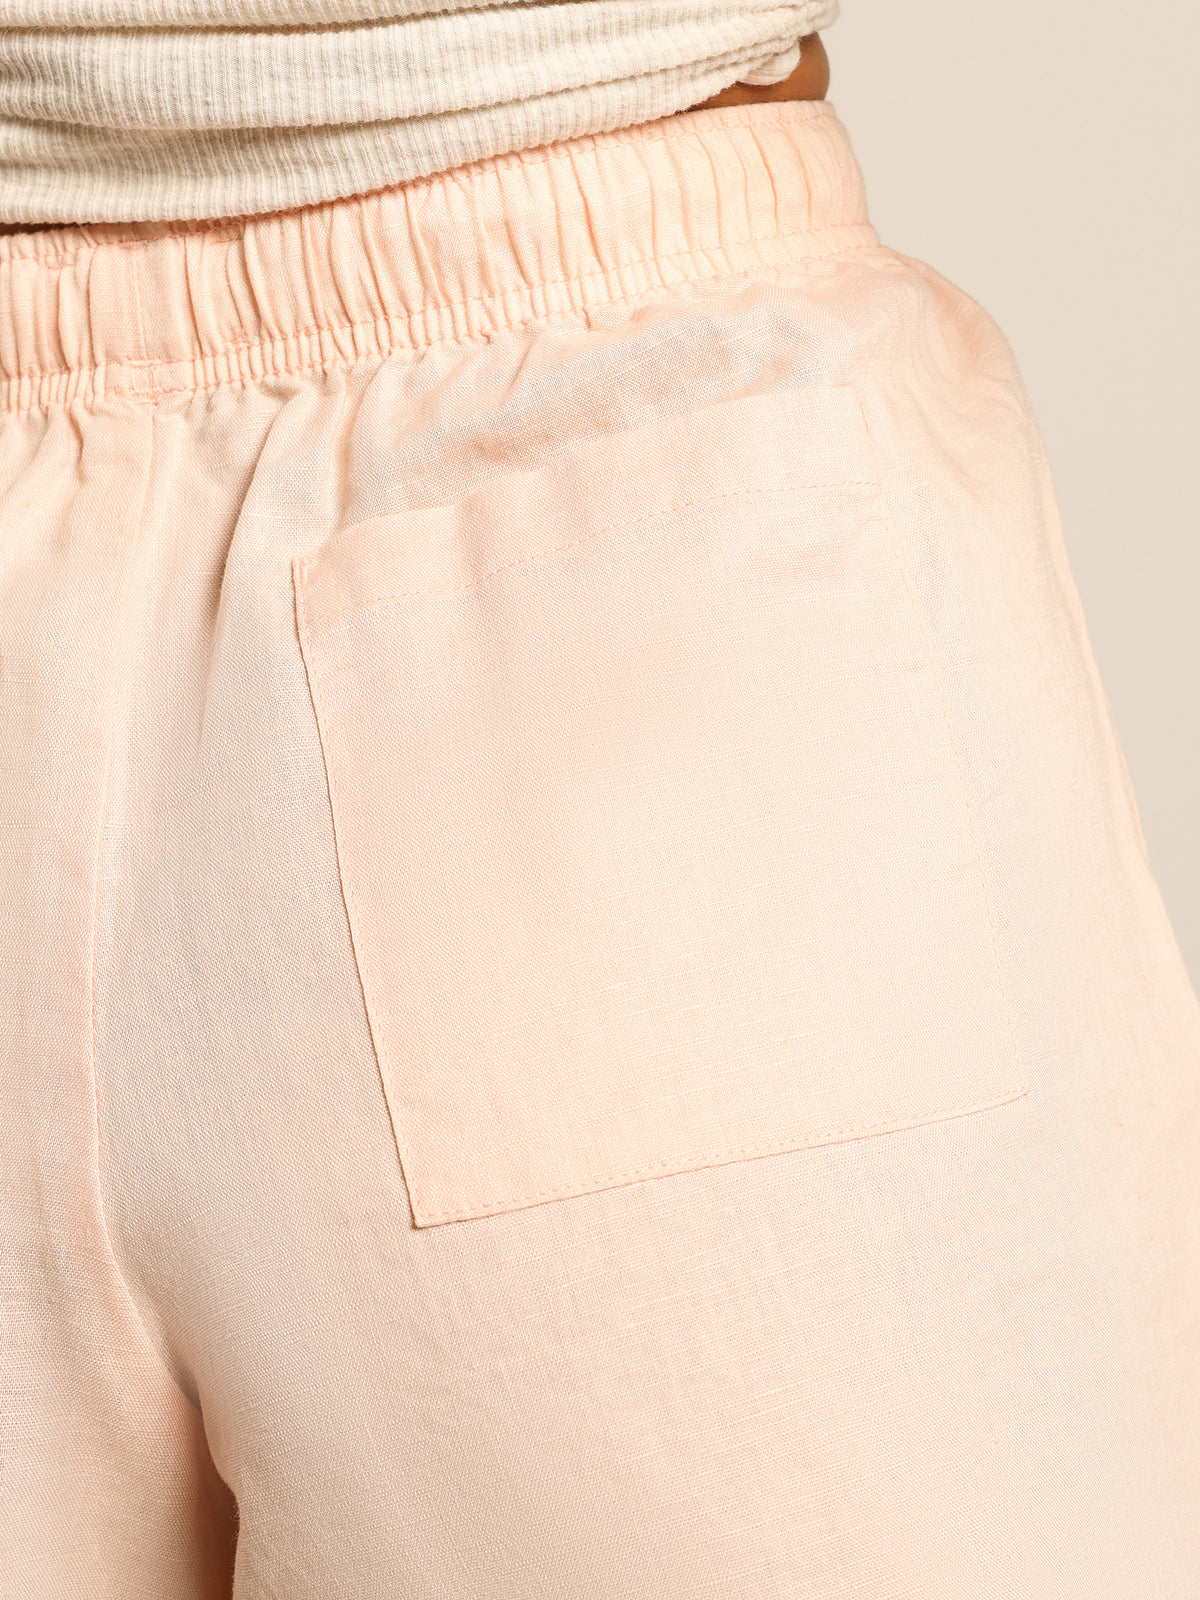 Nude Classic Shorts in Mineral Pink